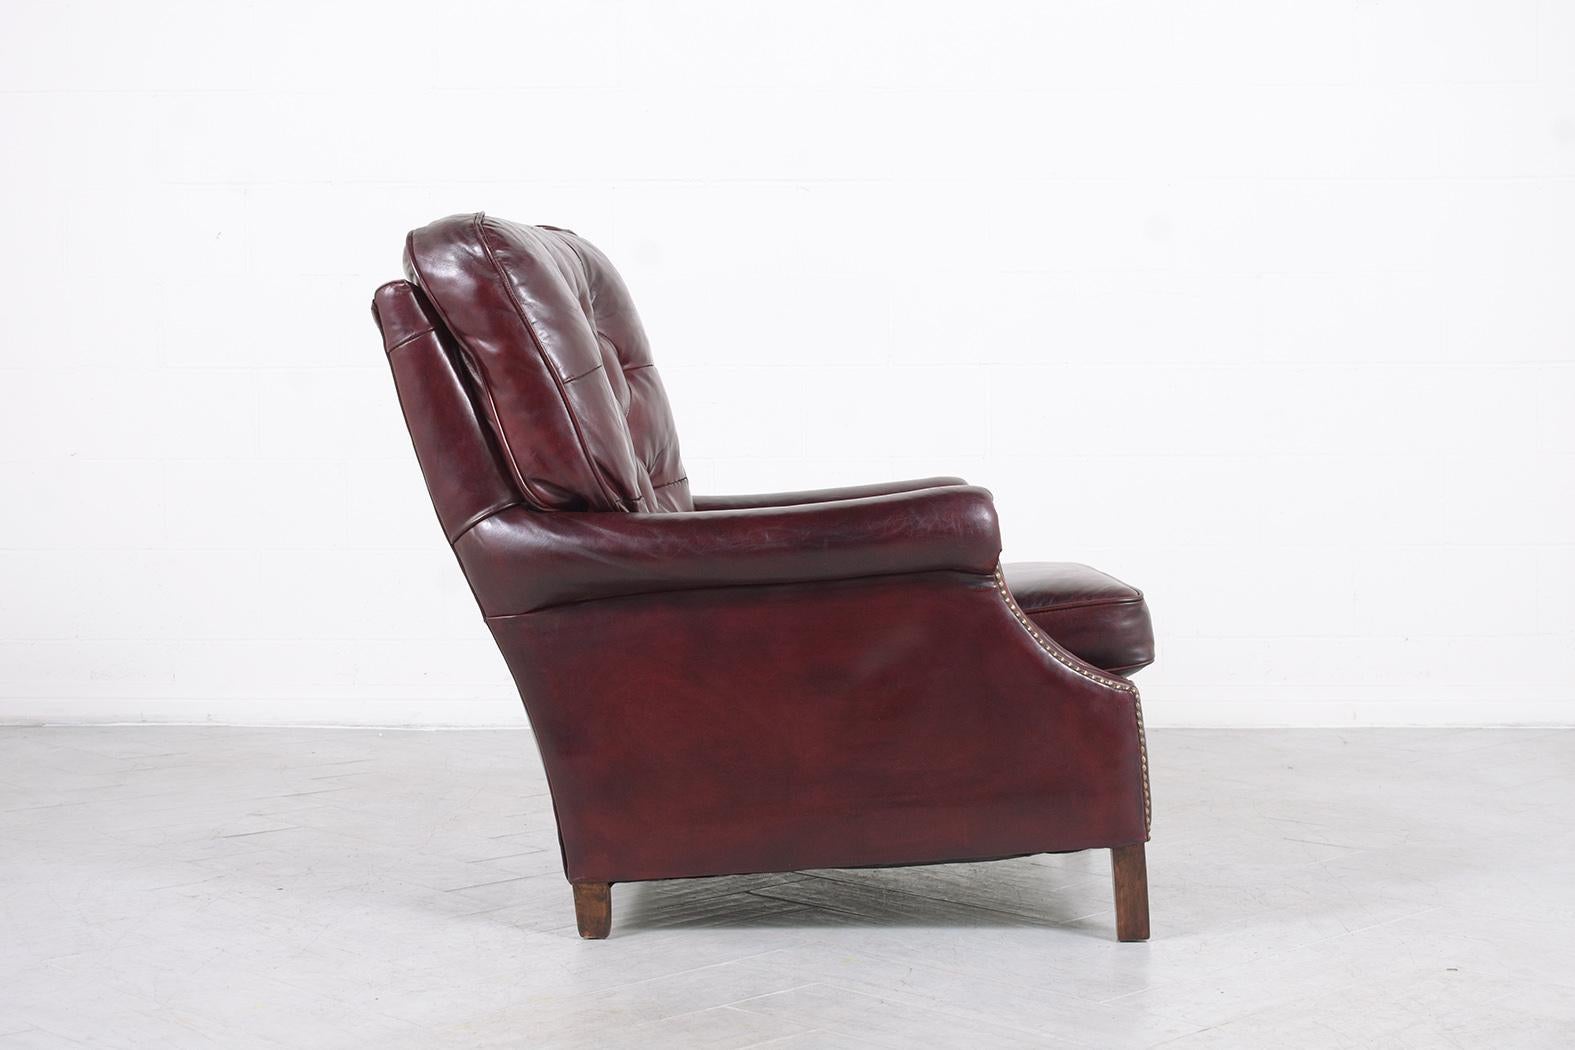 Antique English Chesterfield Lounge Chair: Cordovan Red Leather Tufted Design For Sale 2